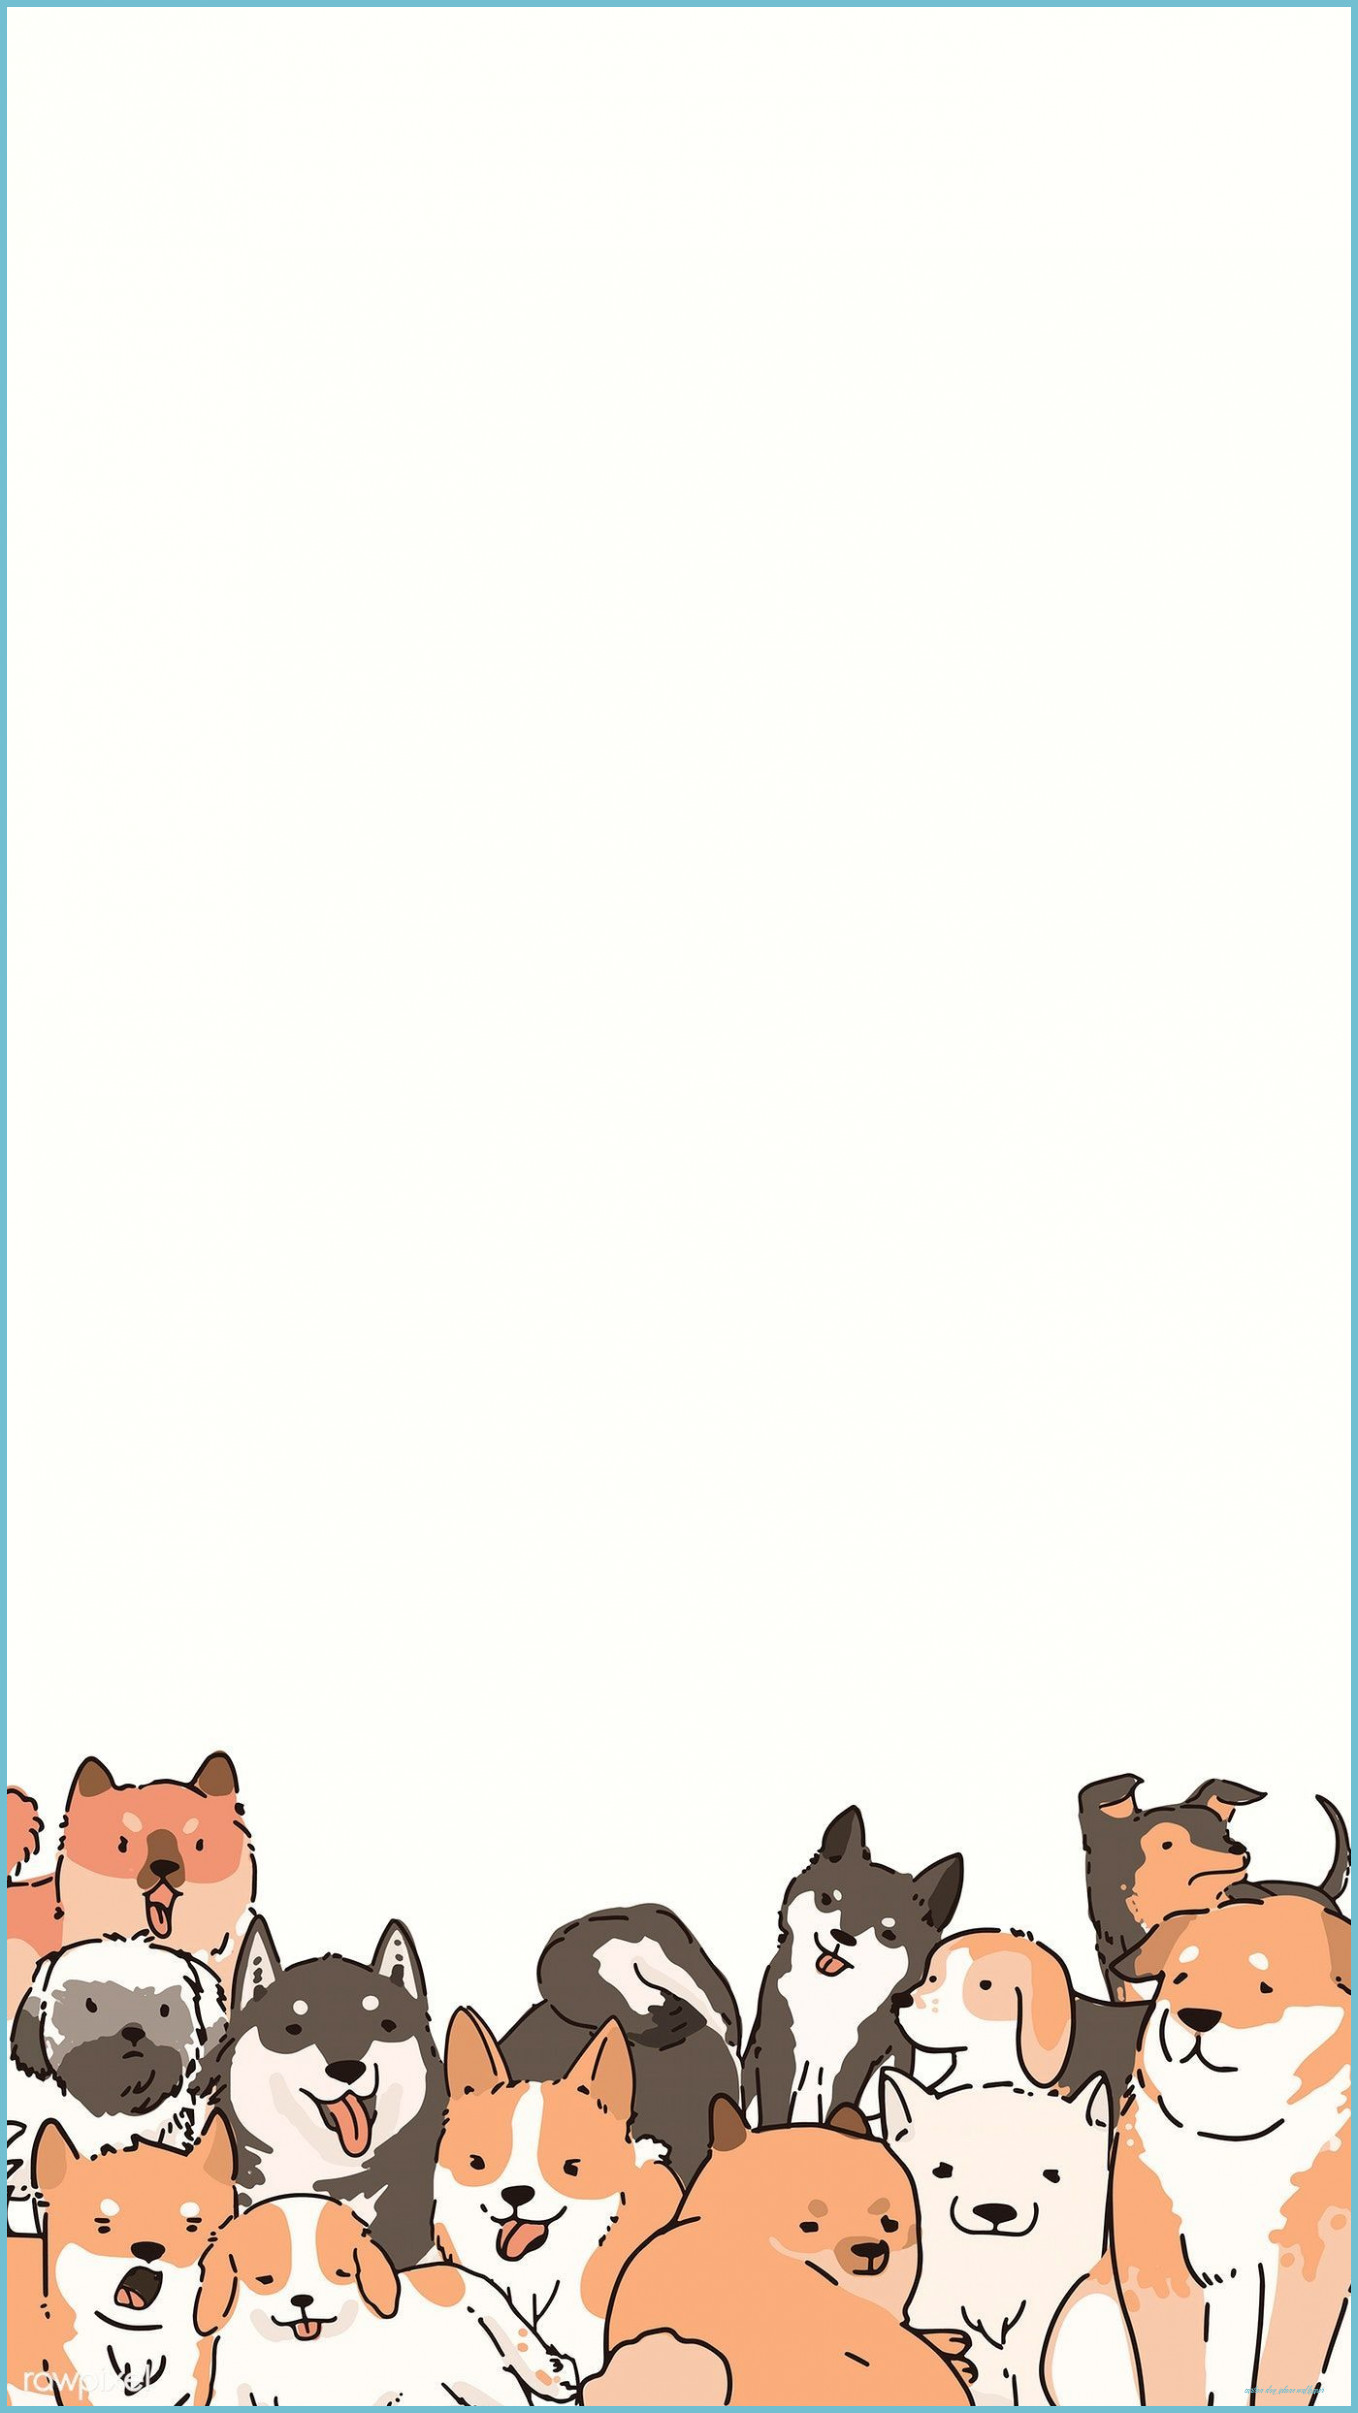 Is Cartoon Dog iPhone Wallpaper The Most Trending Thing Now?. Cartoon Dog iPhone Wallpaper